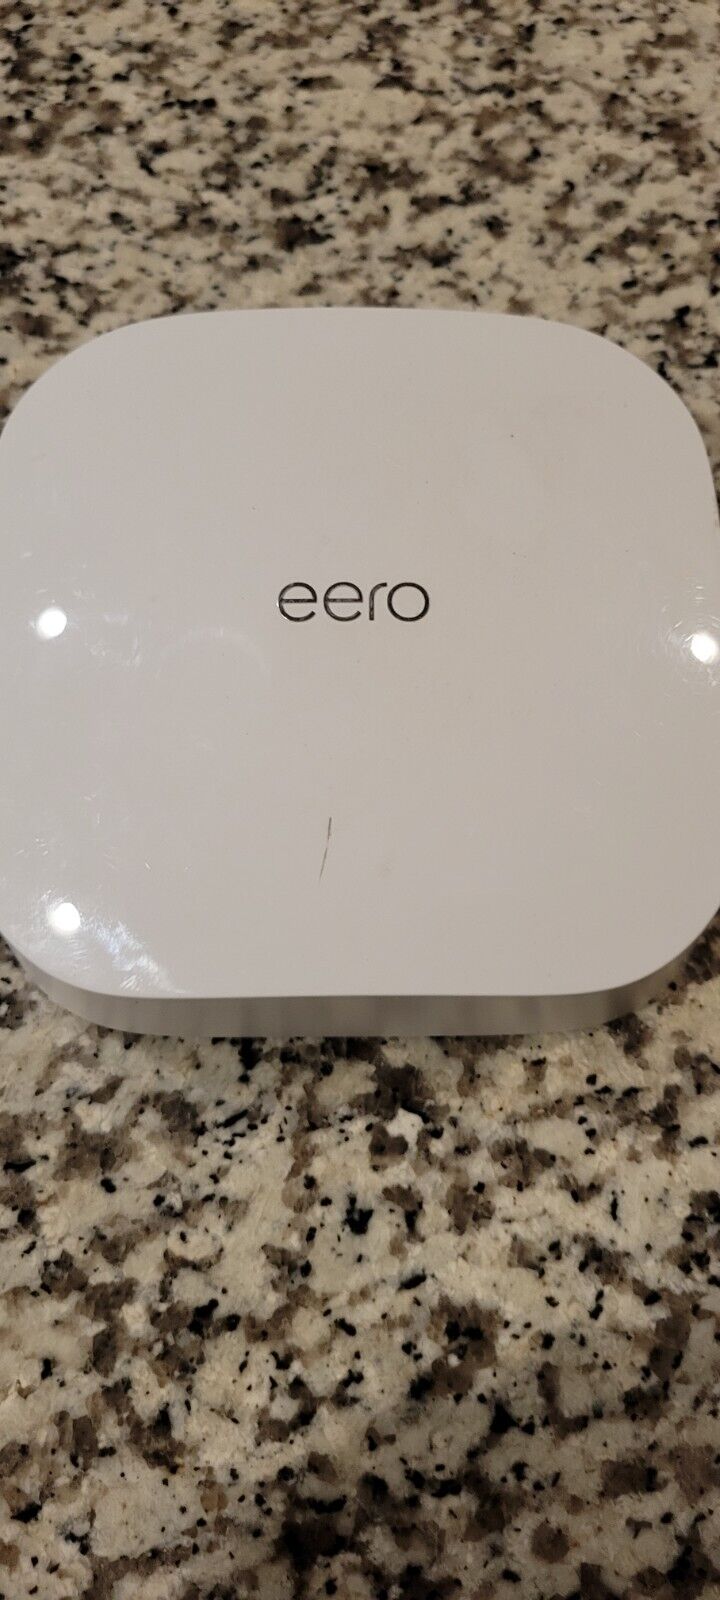 eero Pro 6 1Gbps Tri-Band Mesh Router - White DOEST INCLUDE THE CHARGER.